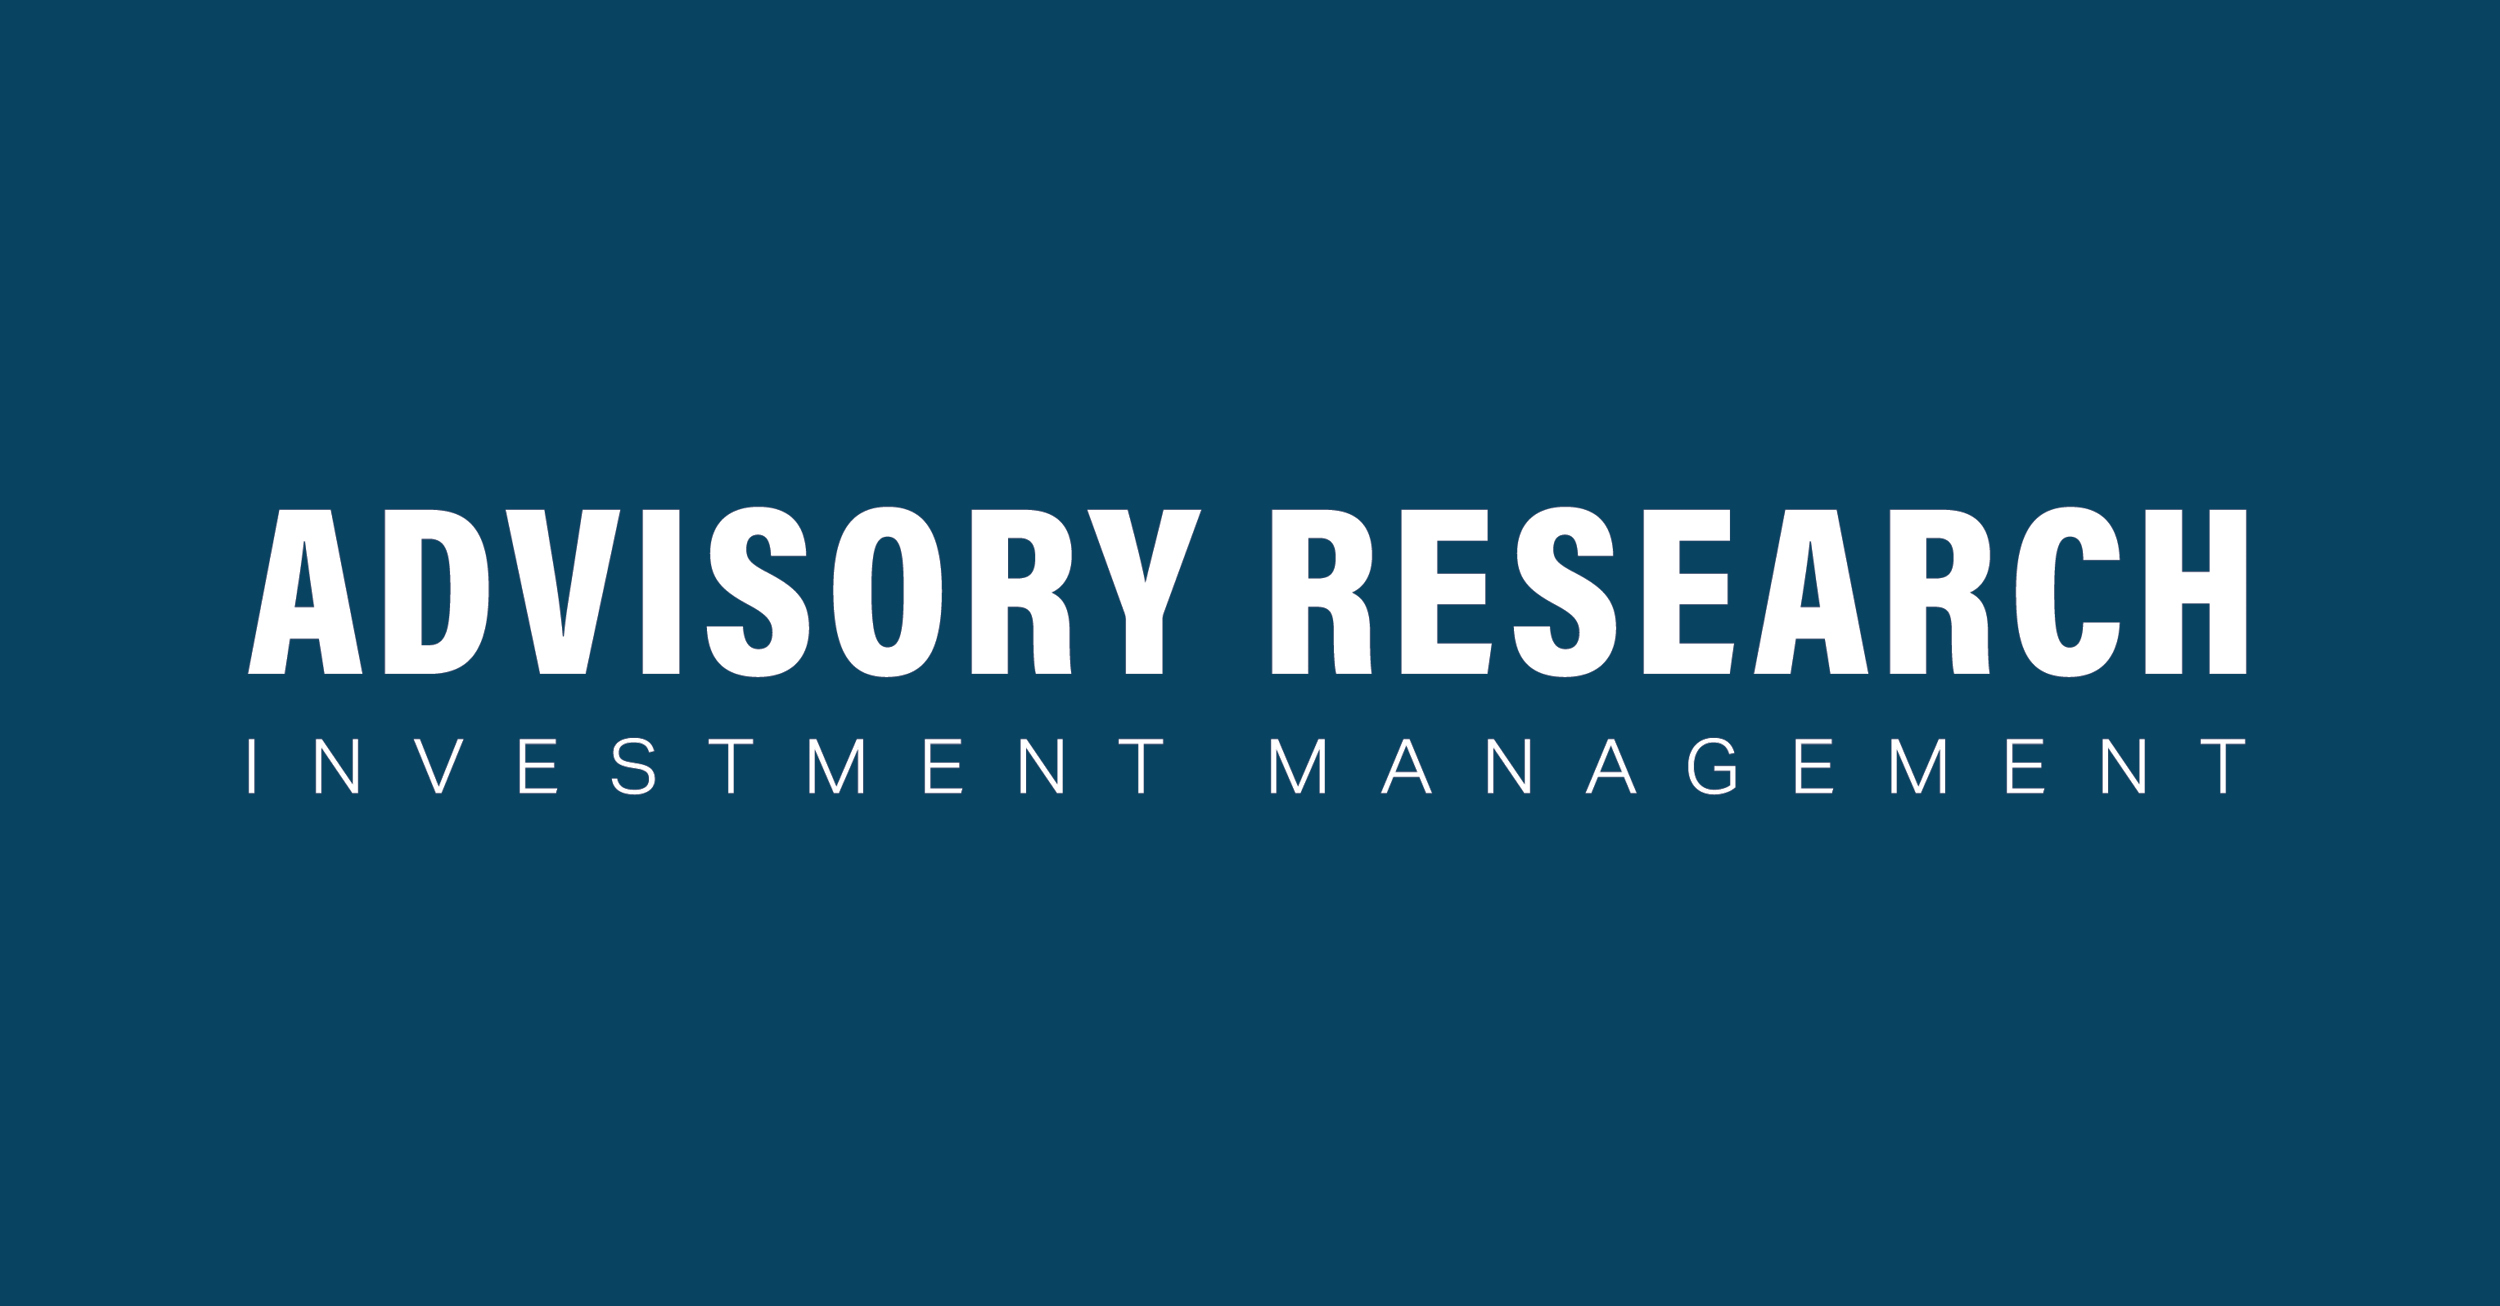 Advisory Research & North Square Investments